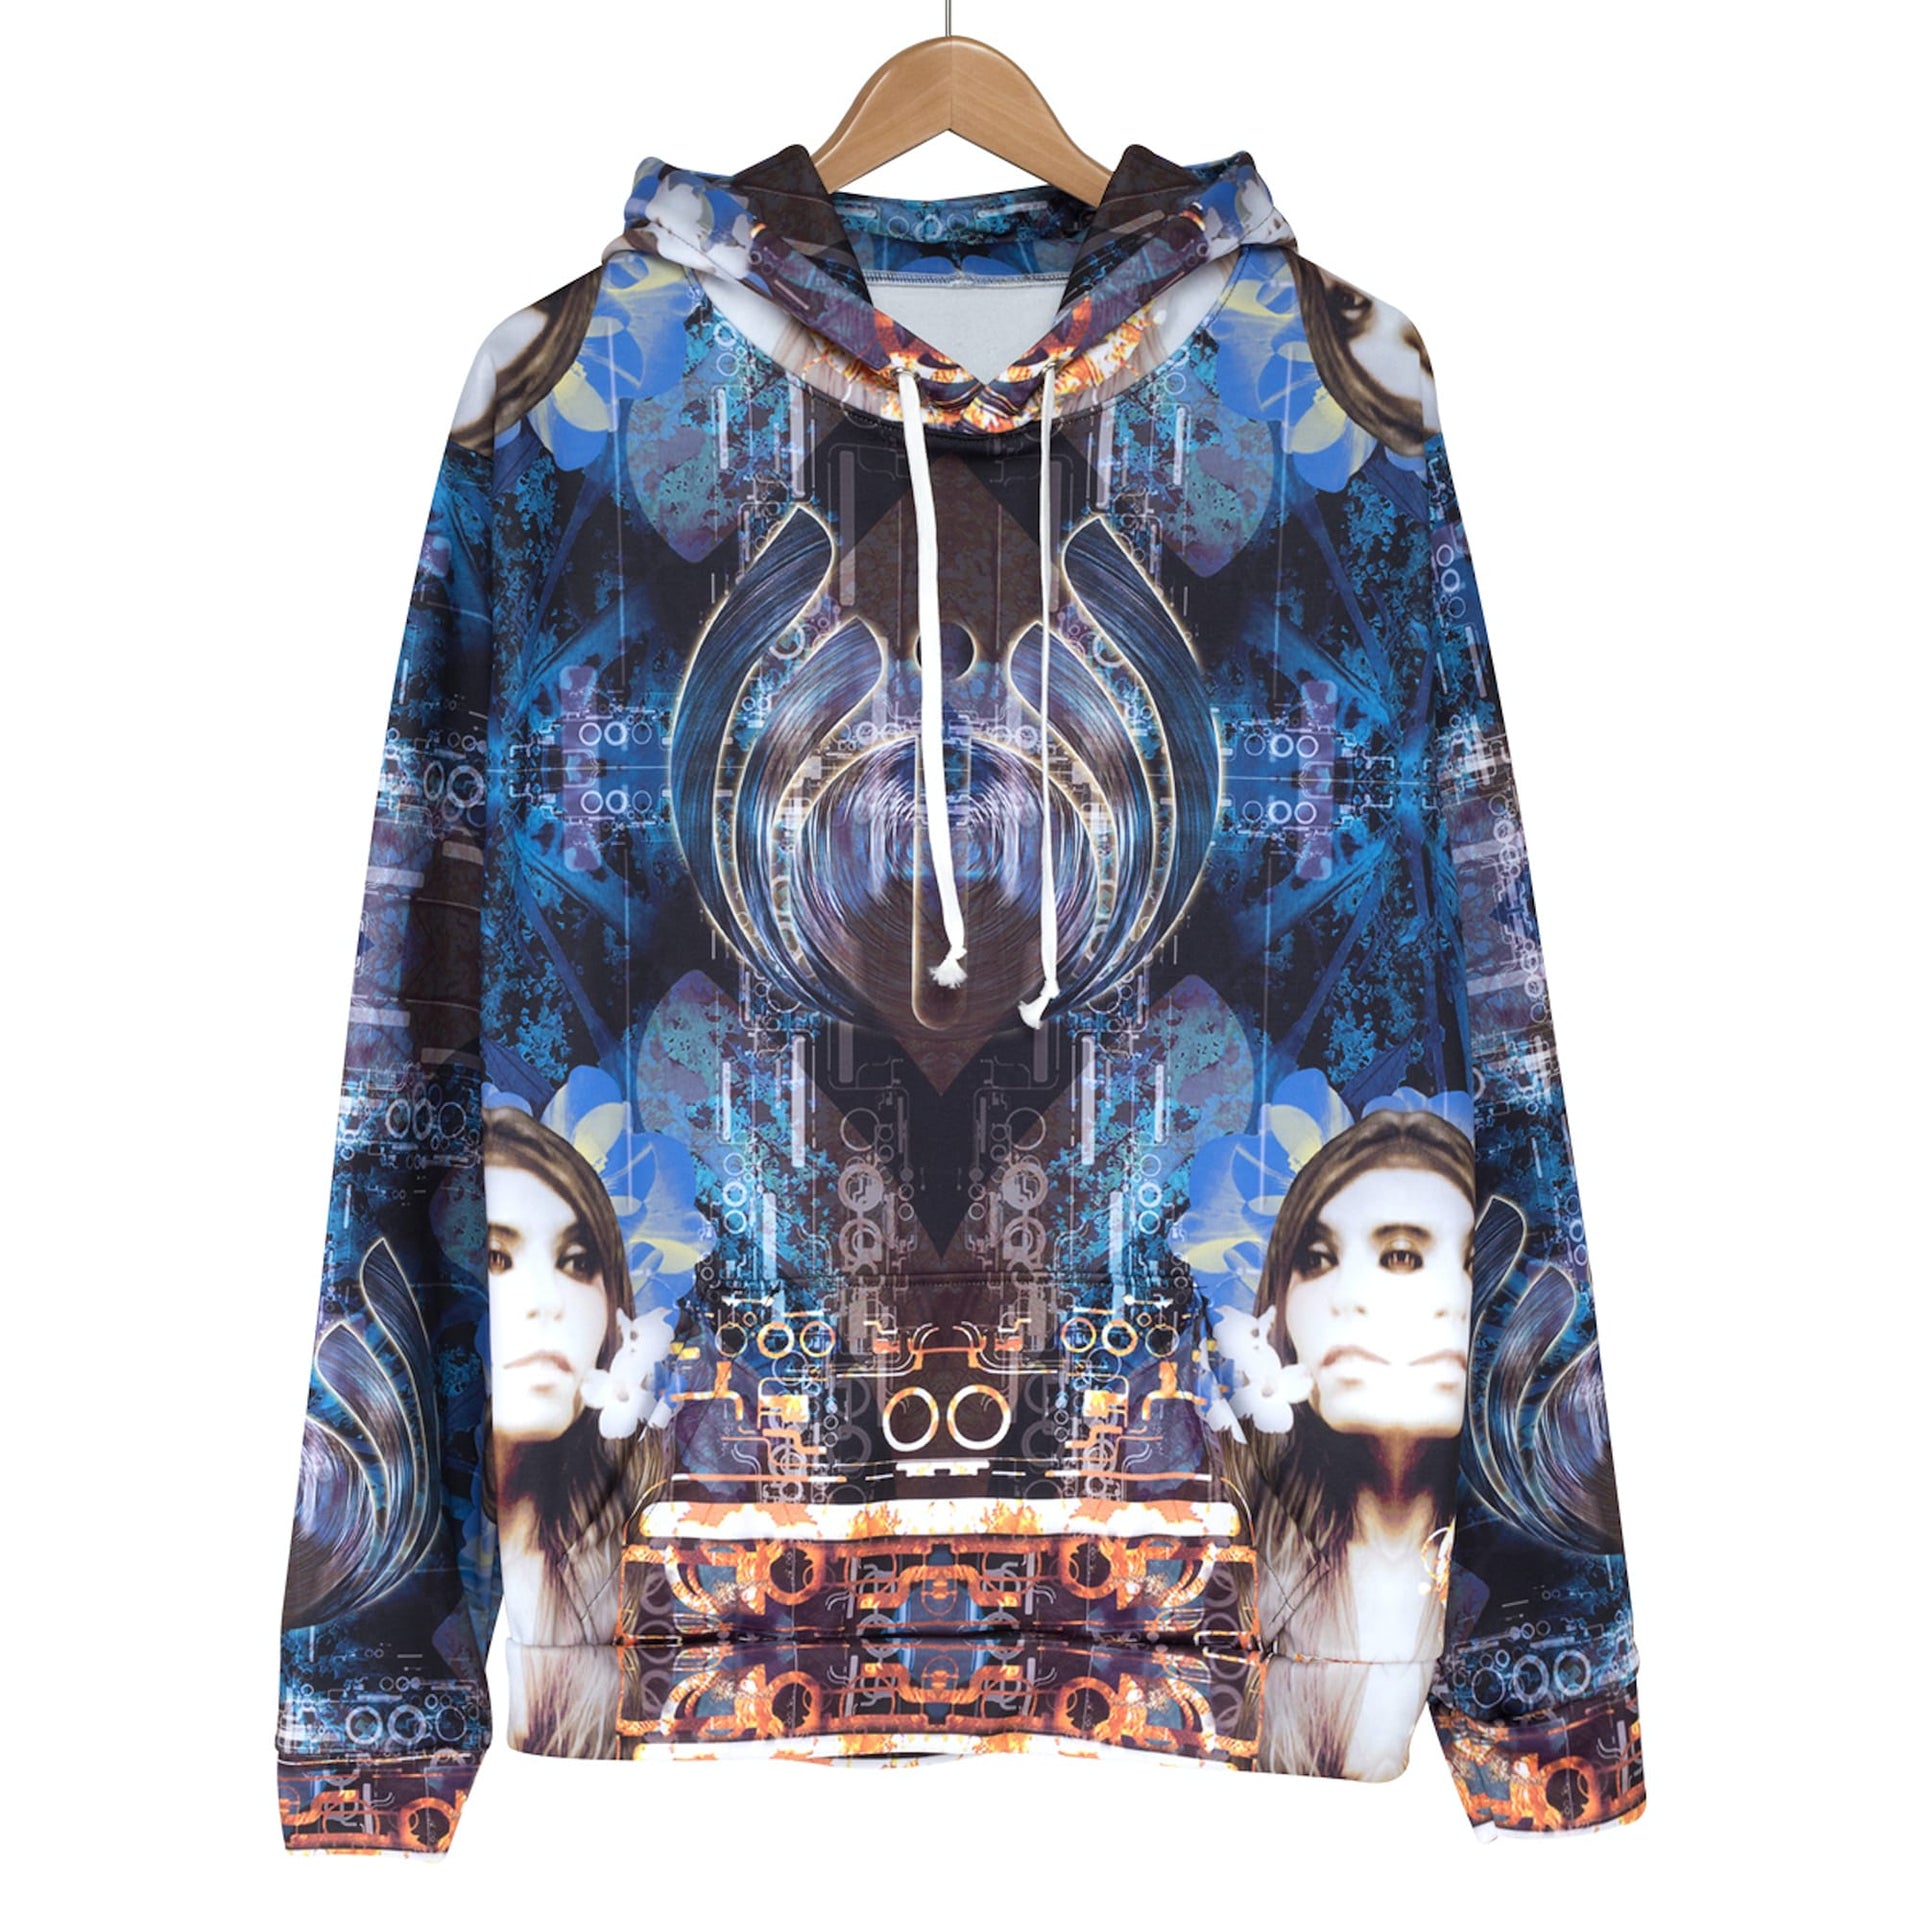 Mesmerize the Ultra Hoodie